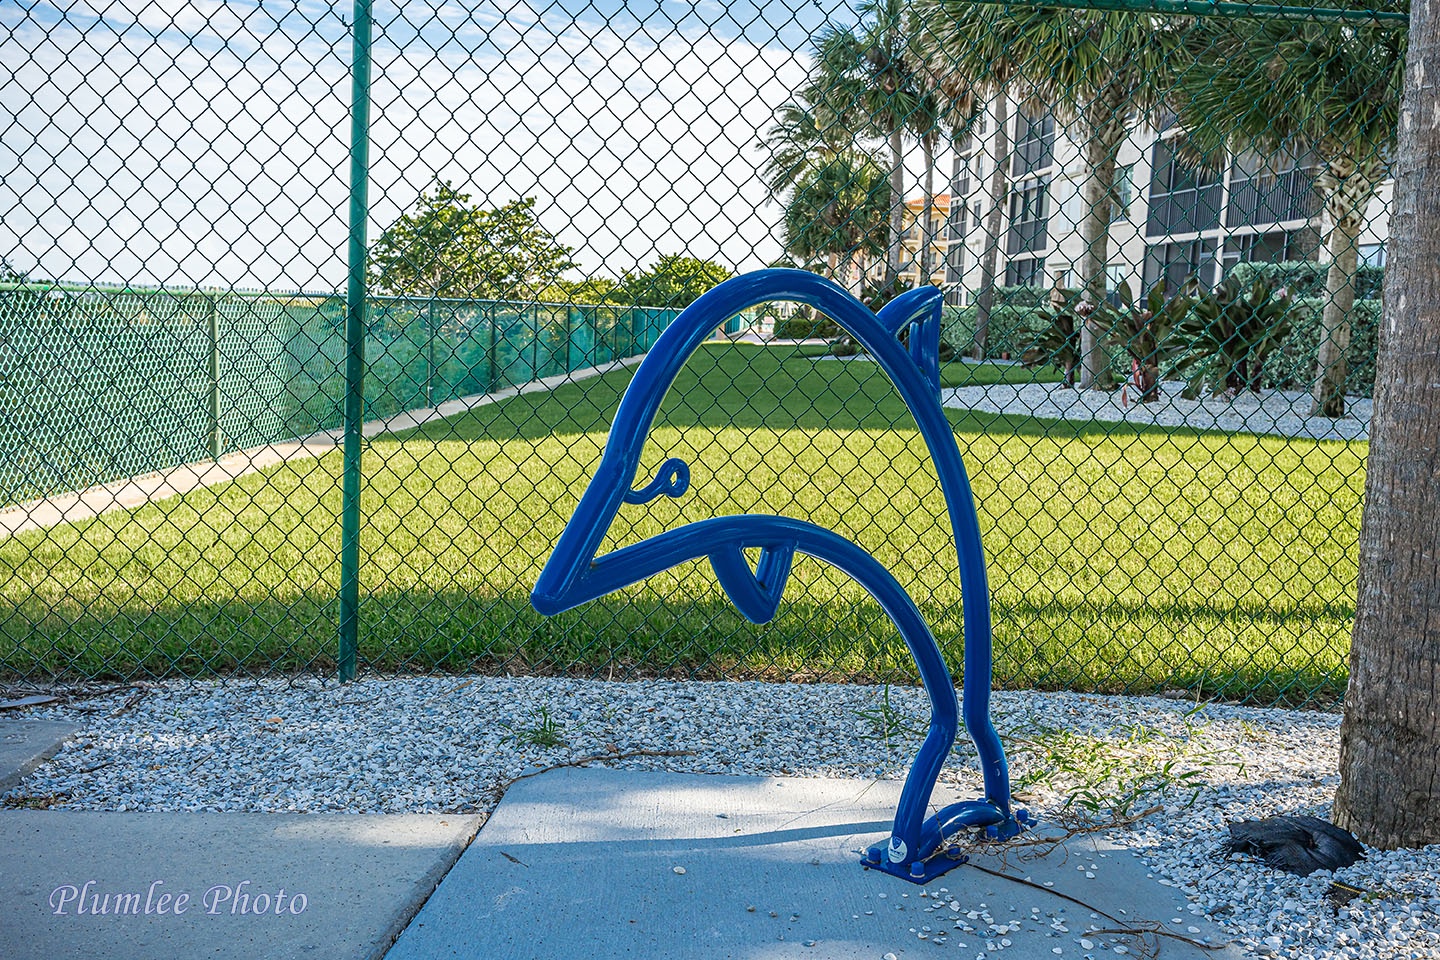 Dolphin shaped bicycle parking